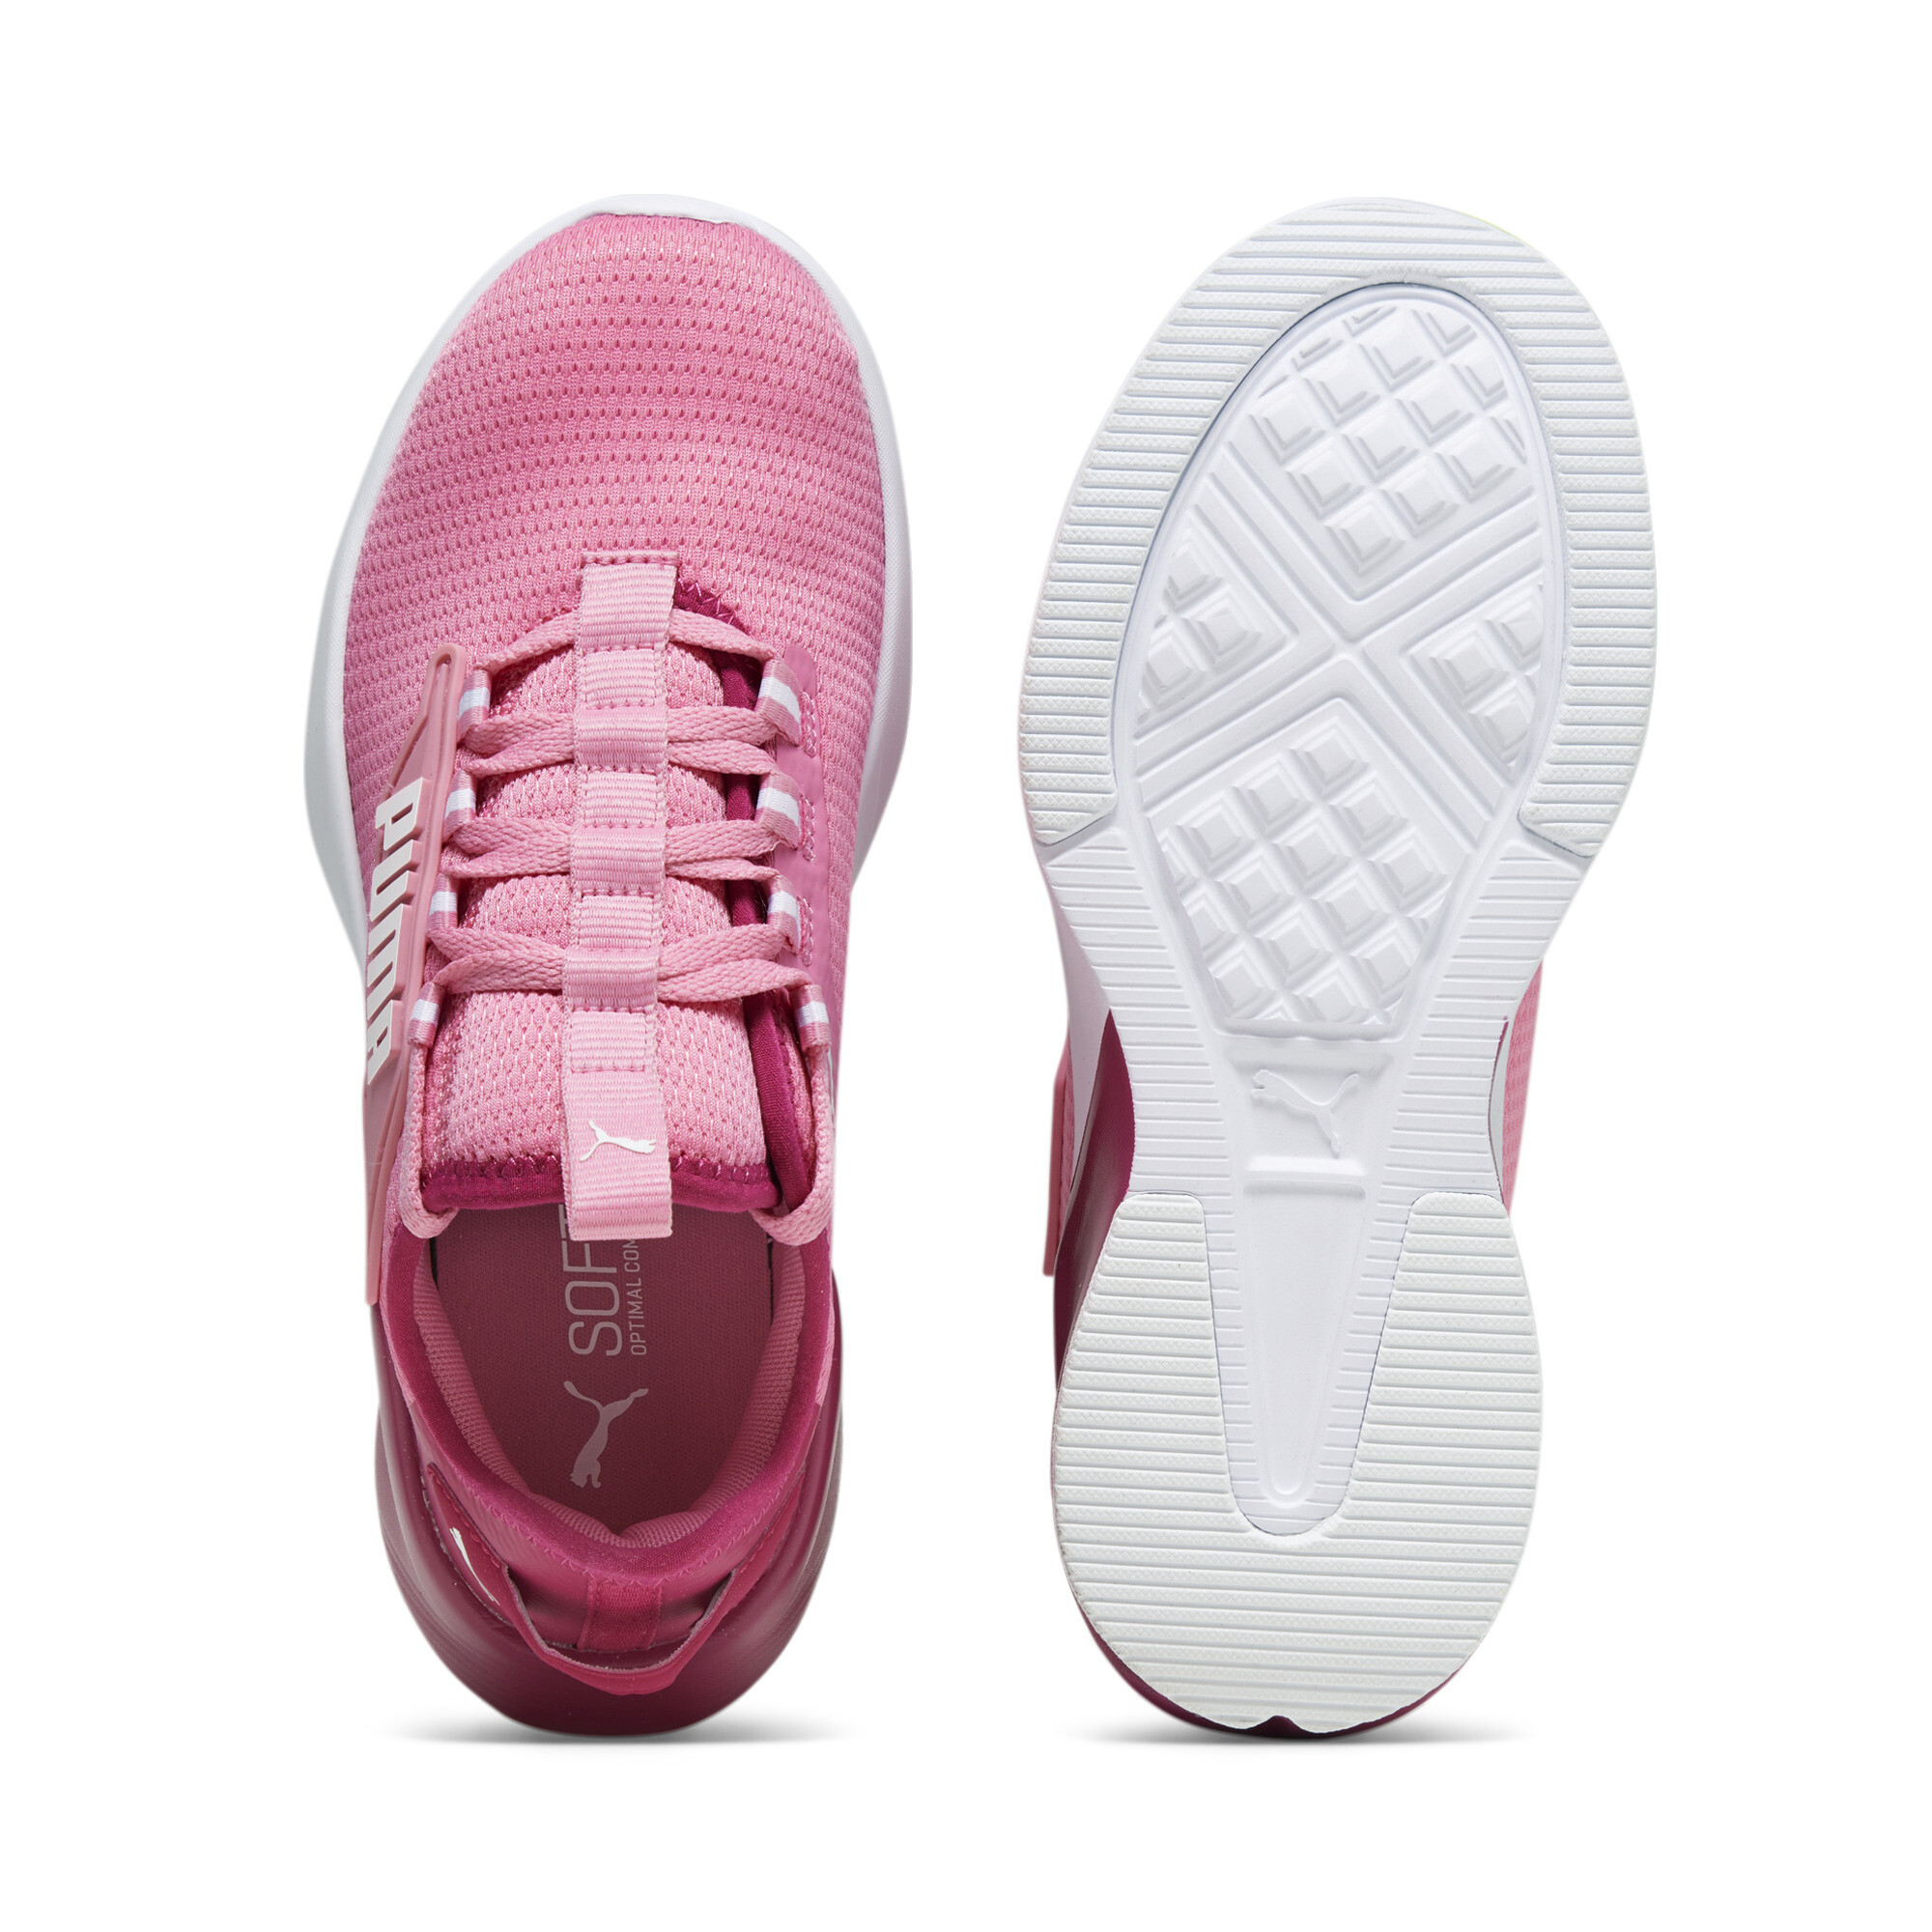 Puma Retaliate 2 Sneakers Youth, Pink, Size 37, Shoes